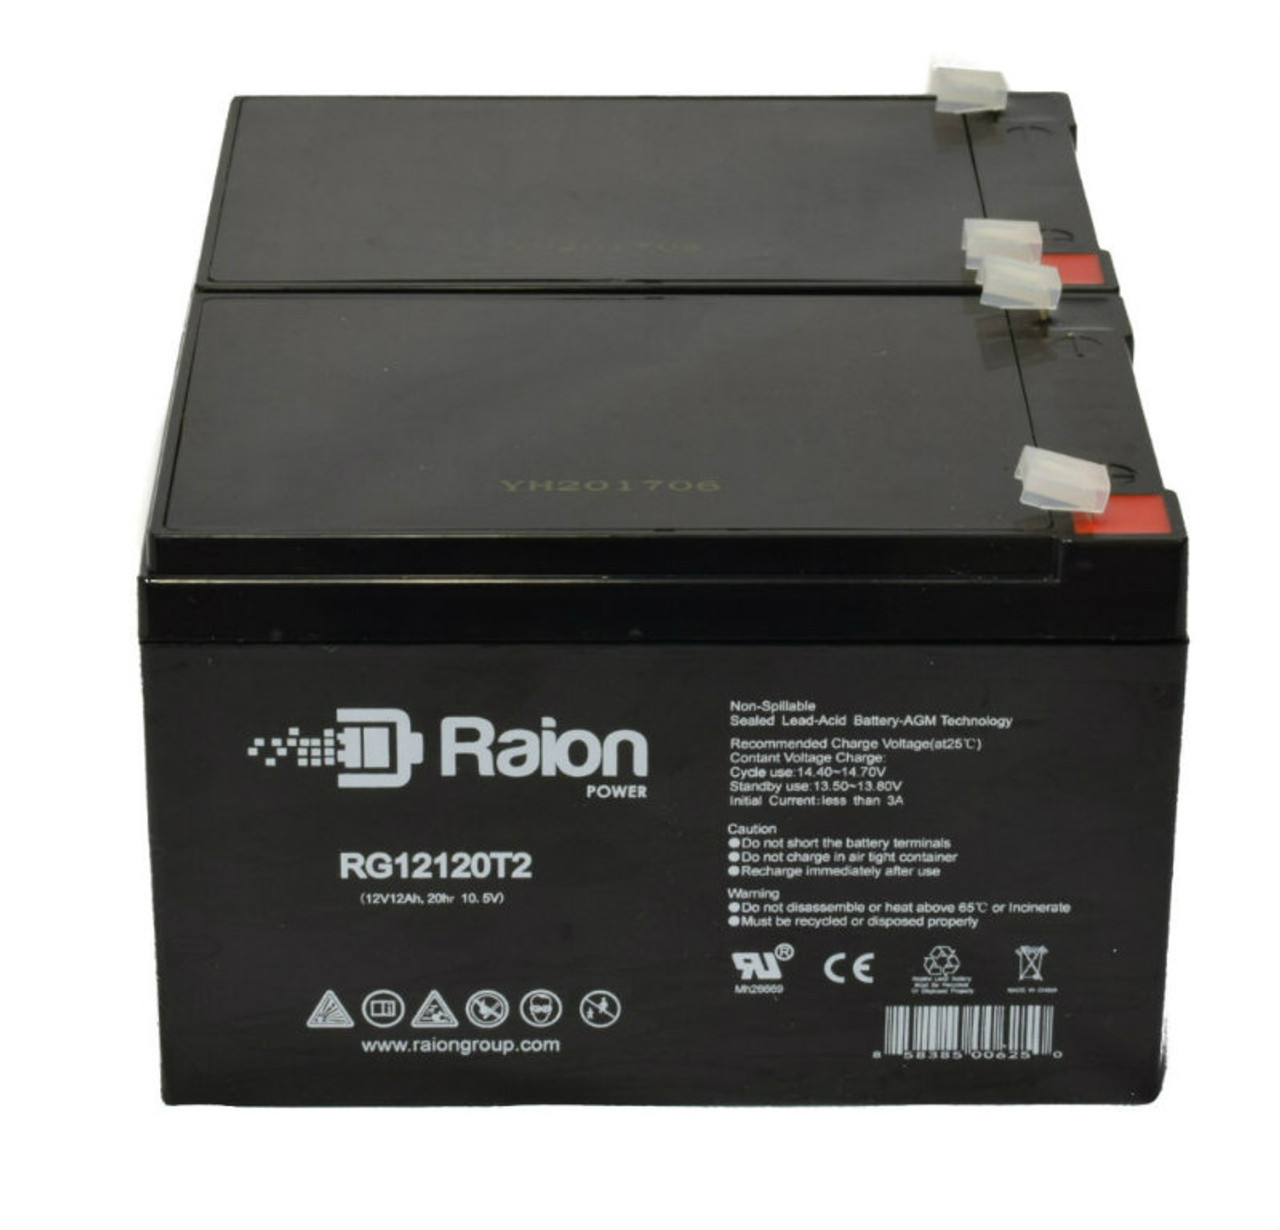 Raion Power 12V 12Ah Non-Spillable Compatible Replacement Battery for Sealake FM12120 - (2 Pack)